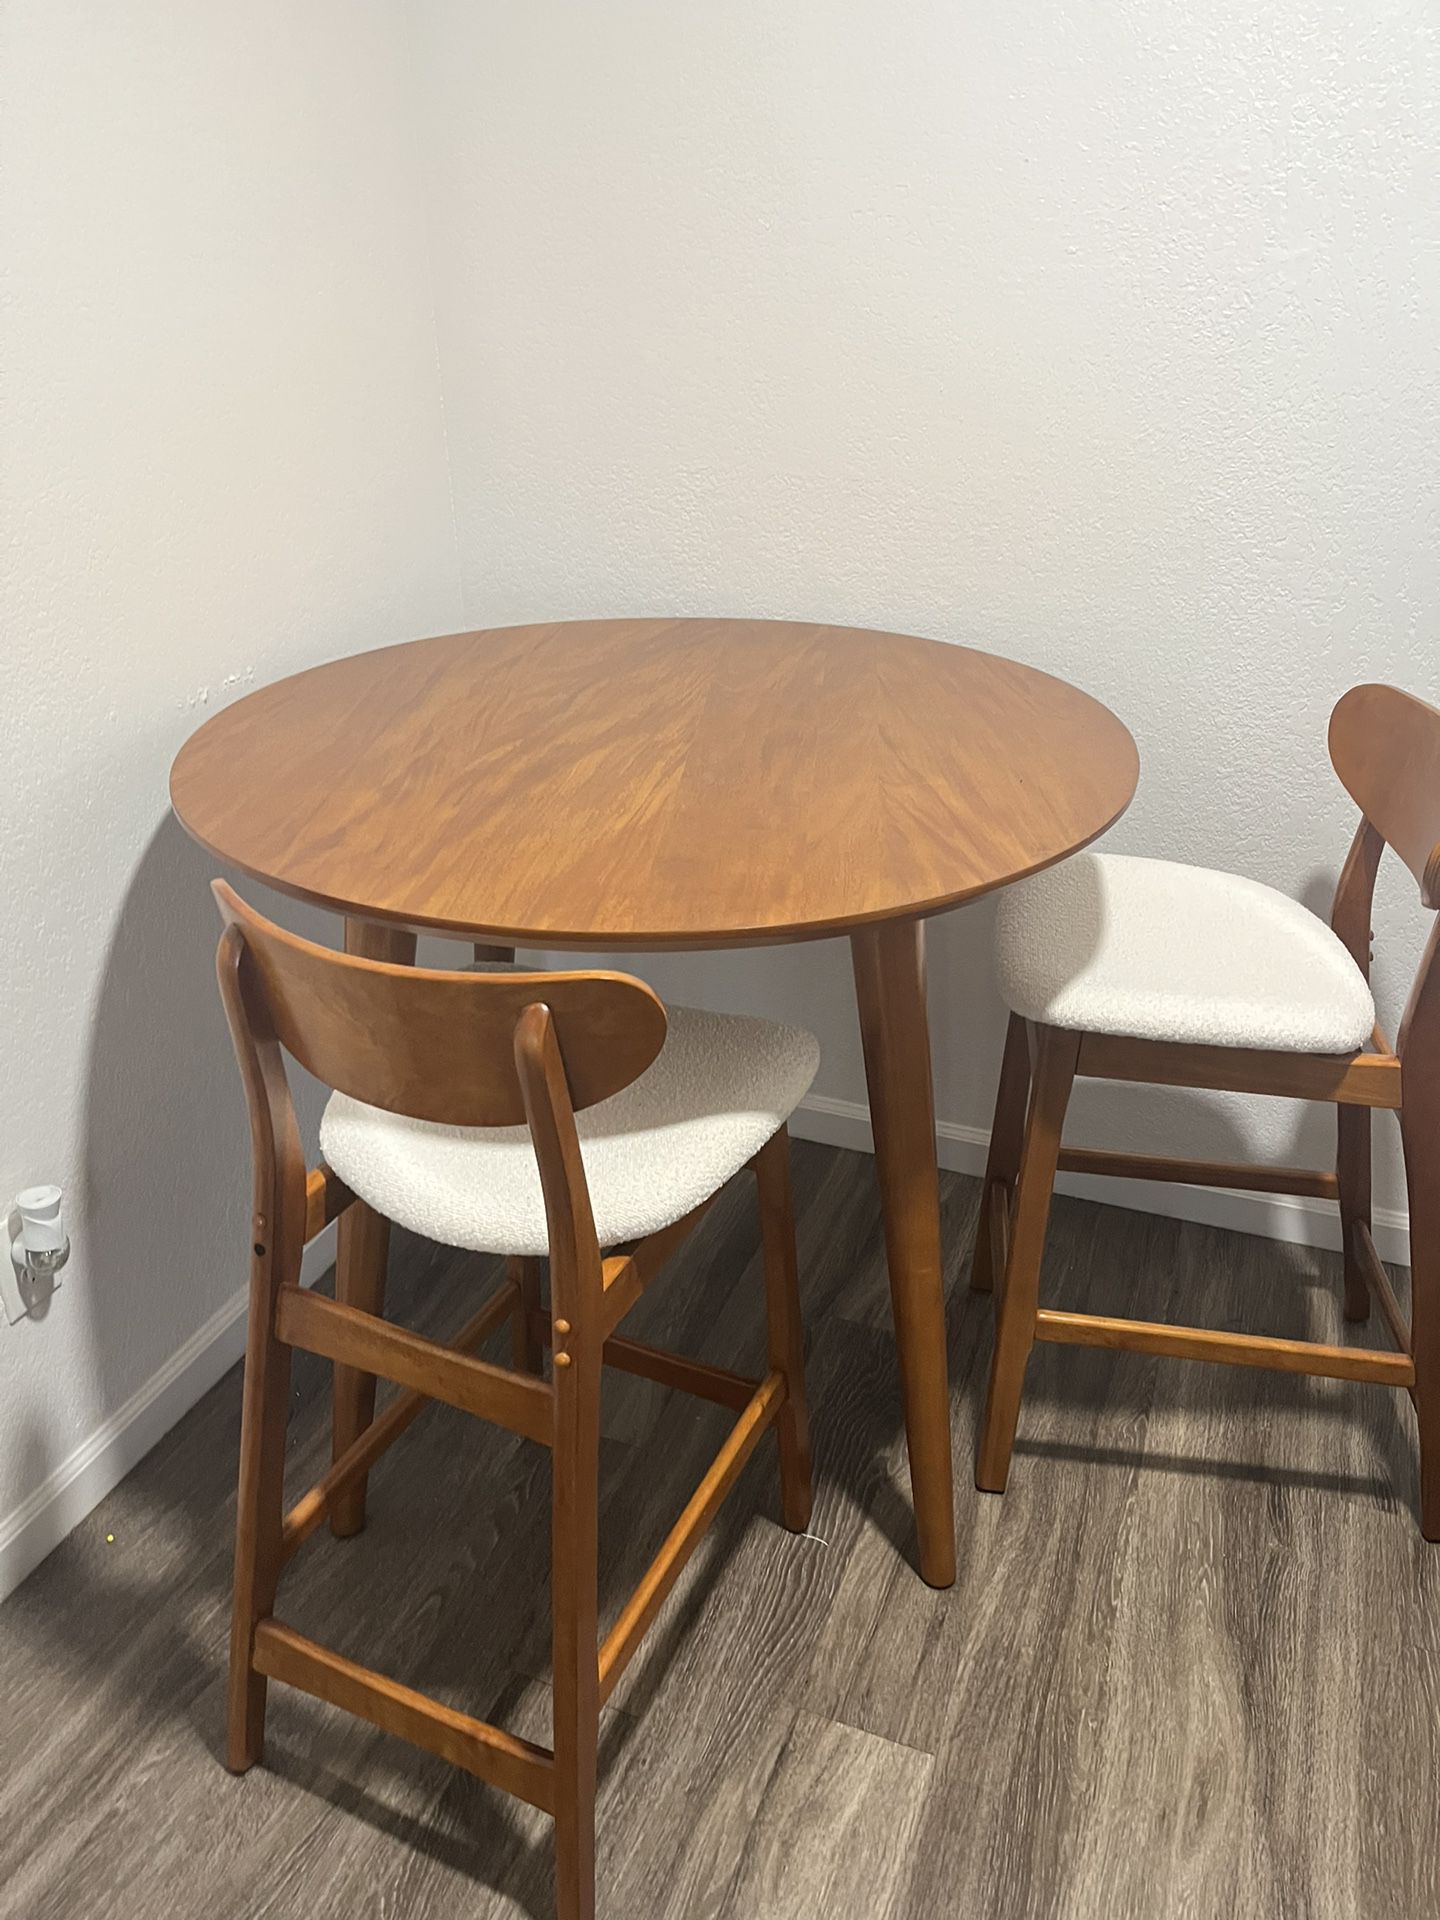 Living Spaces Kitchen Table And Chairs